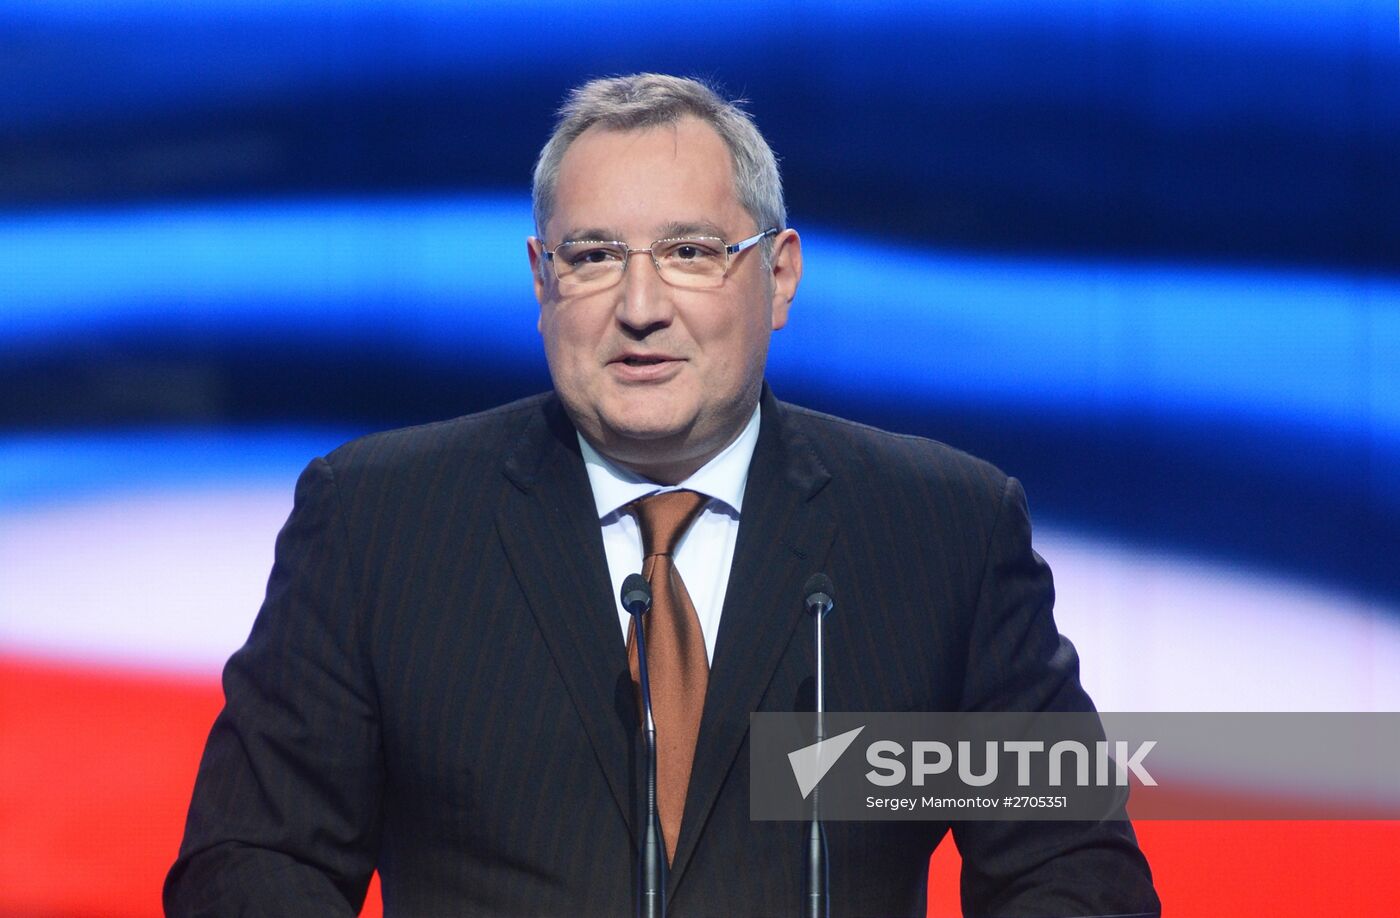 Rogozin addresses a gathering marking 70th anniversary of nuclear industry